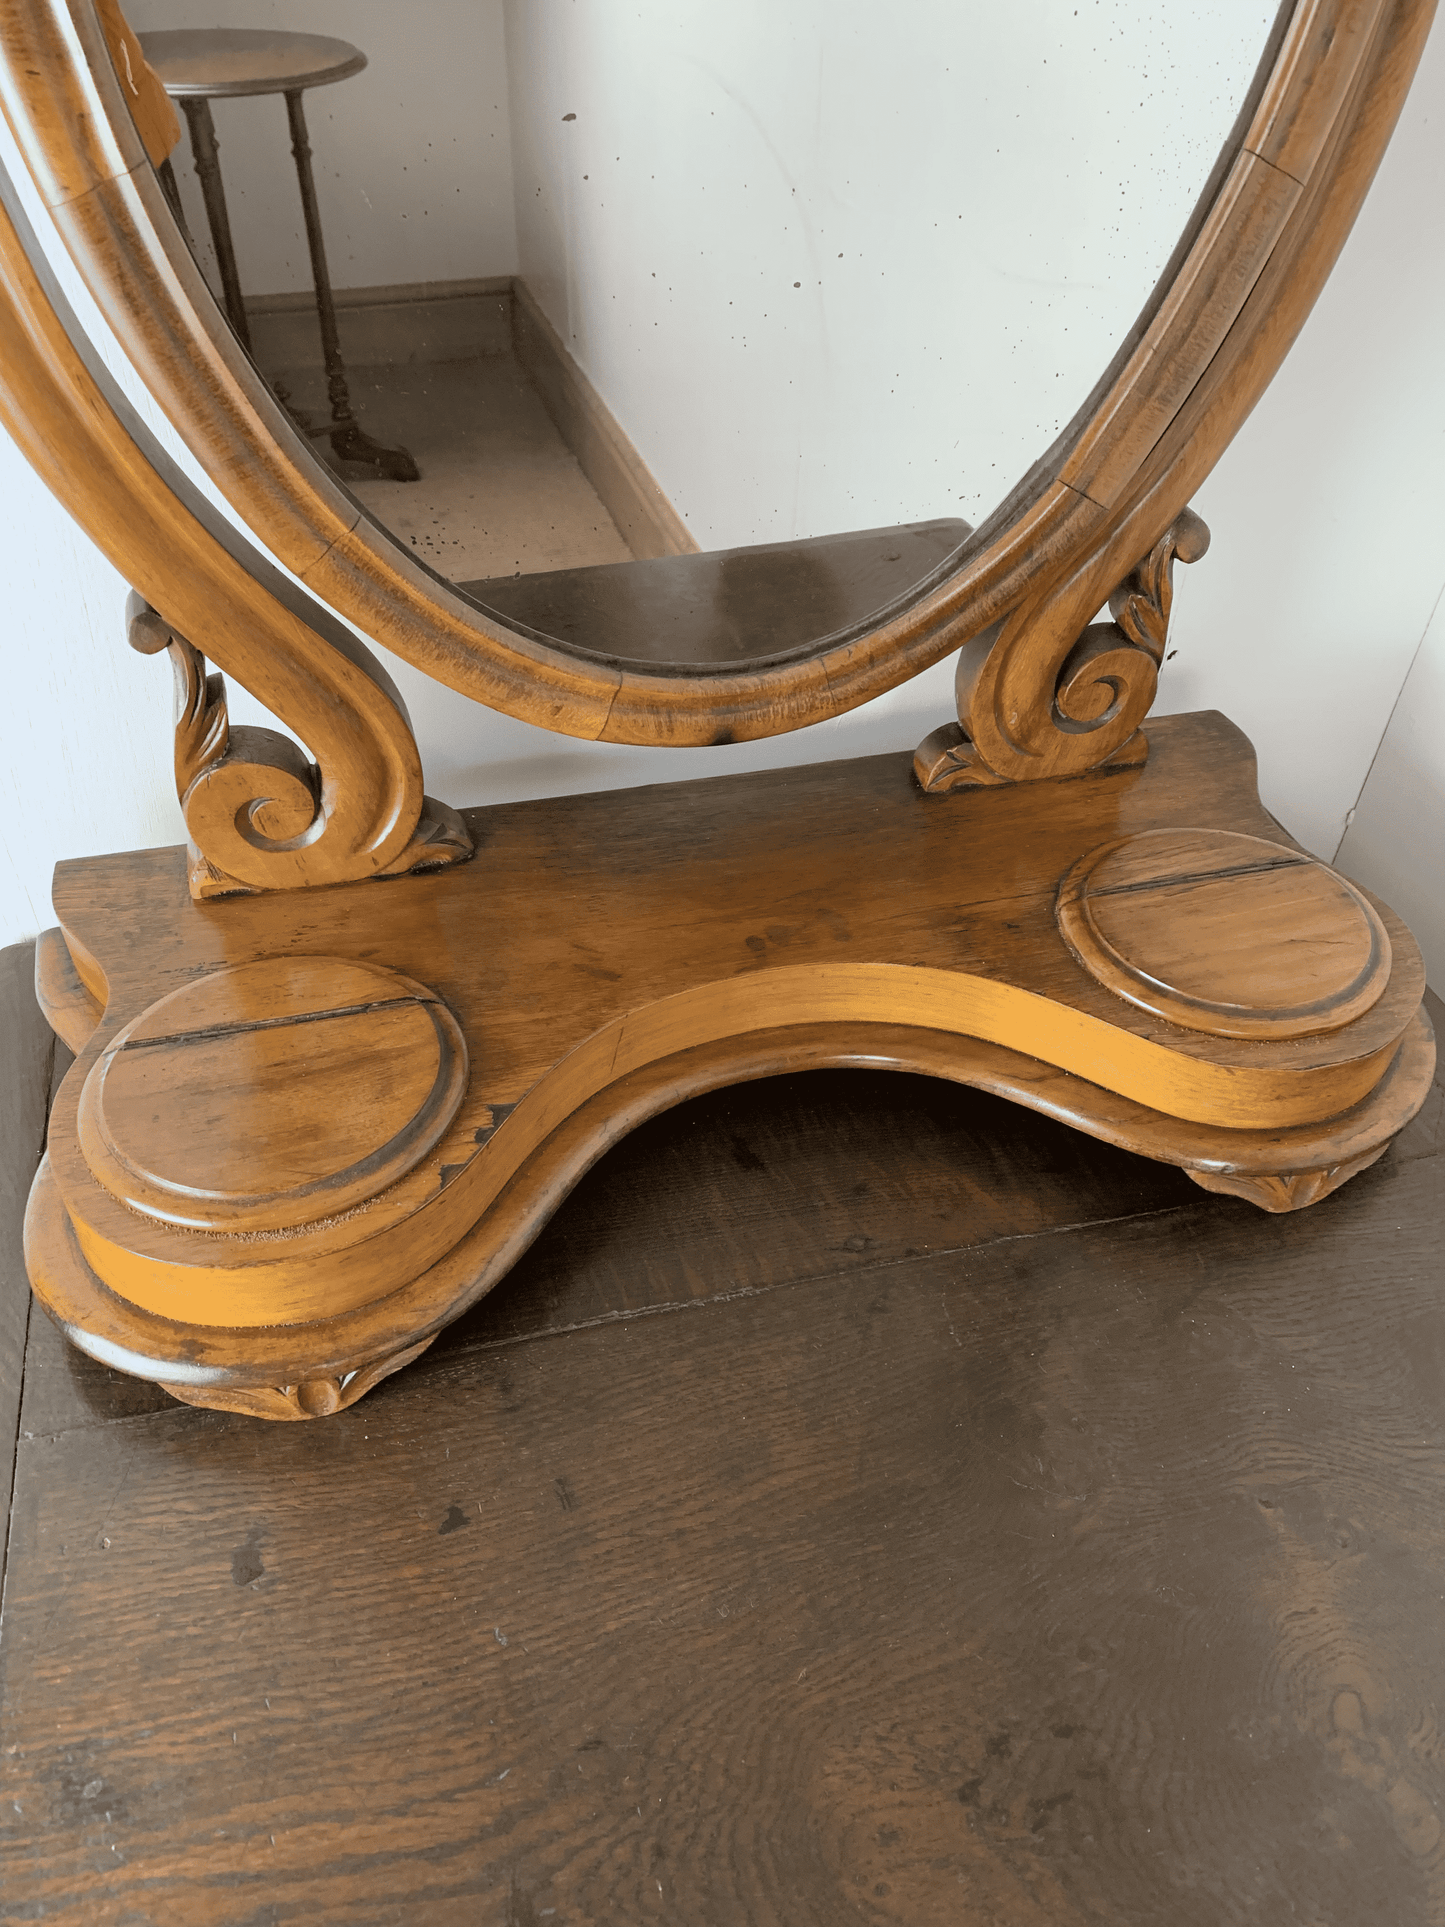 Preserving Heritage: Oval Mirror with History